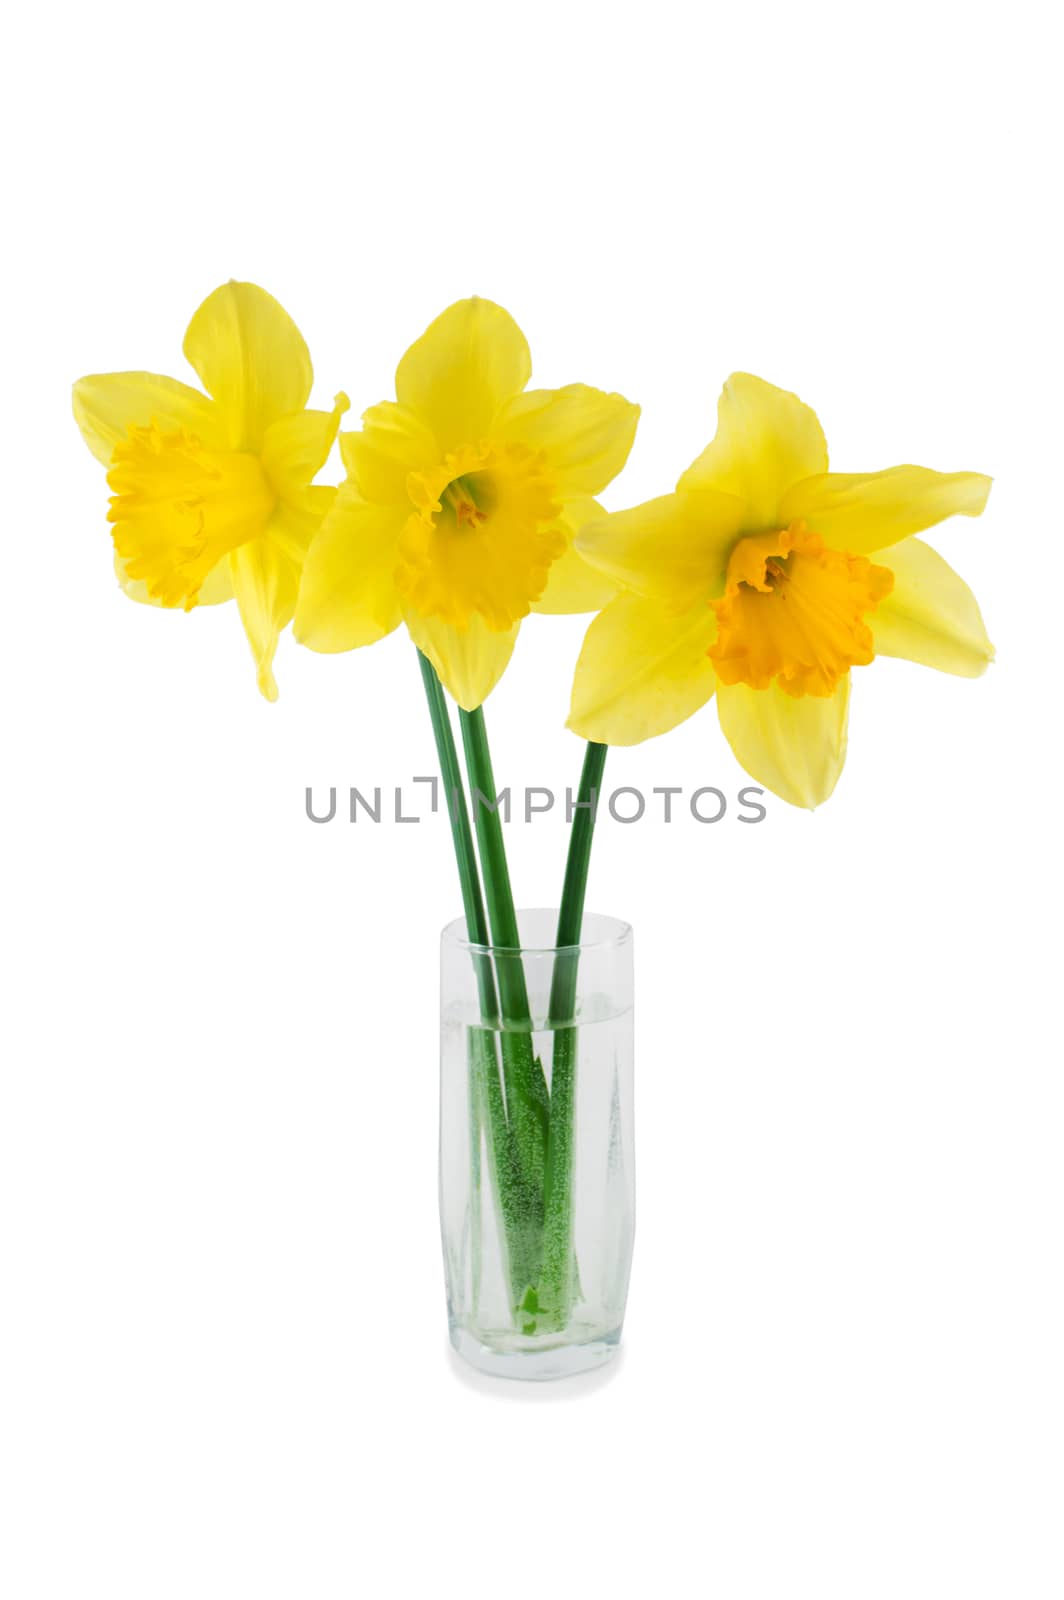 Three narcissuses isolated on a white background